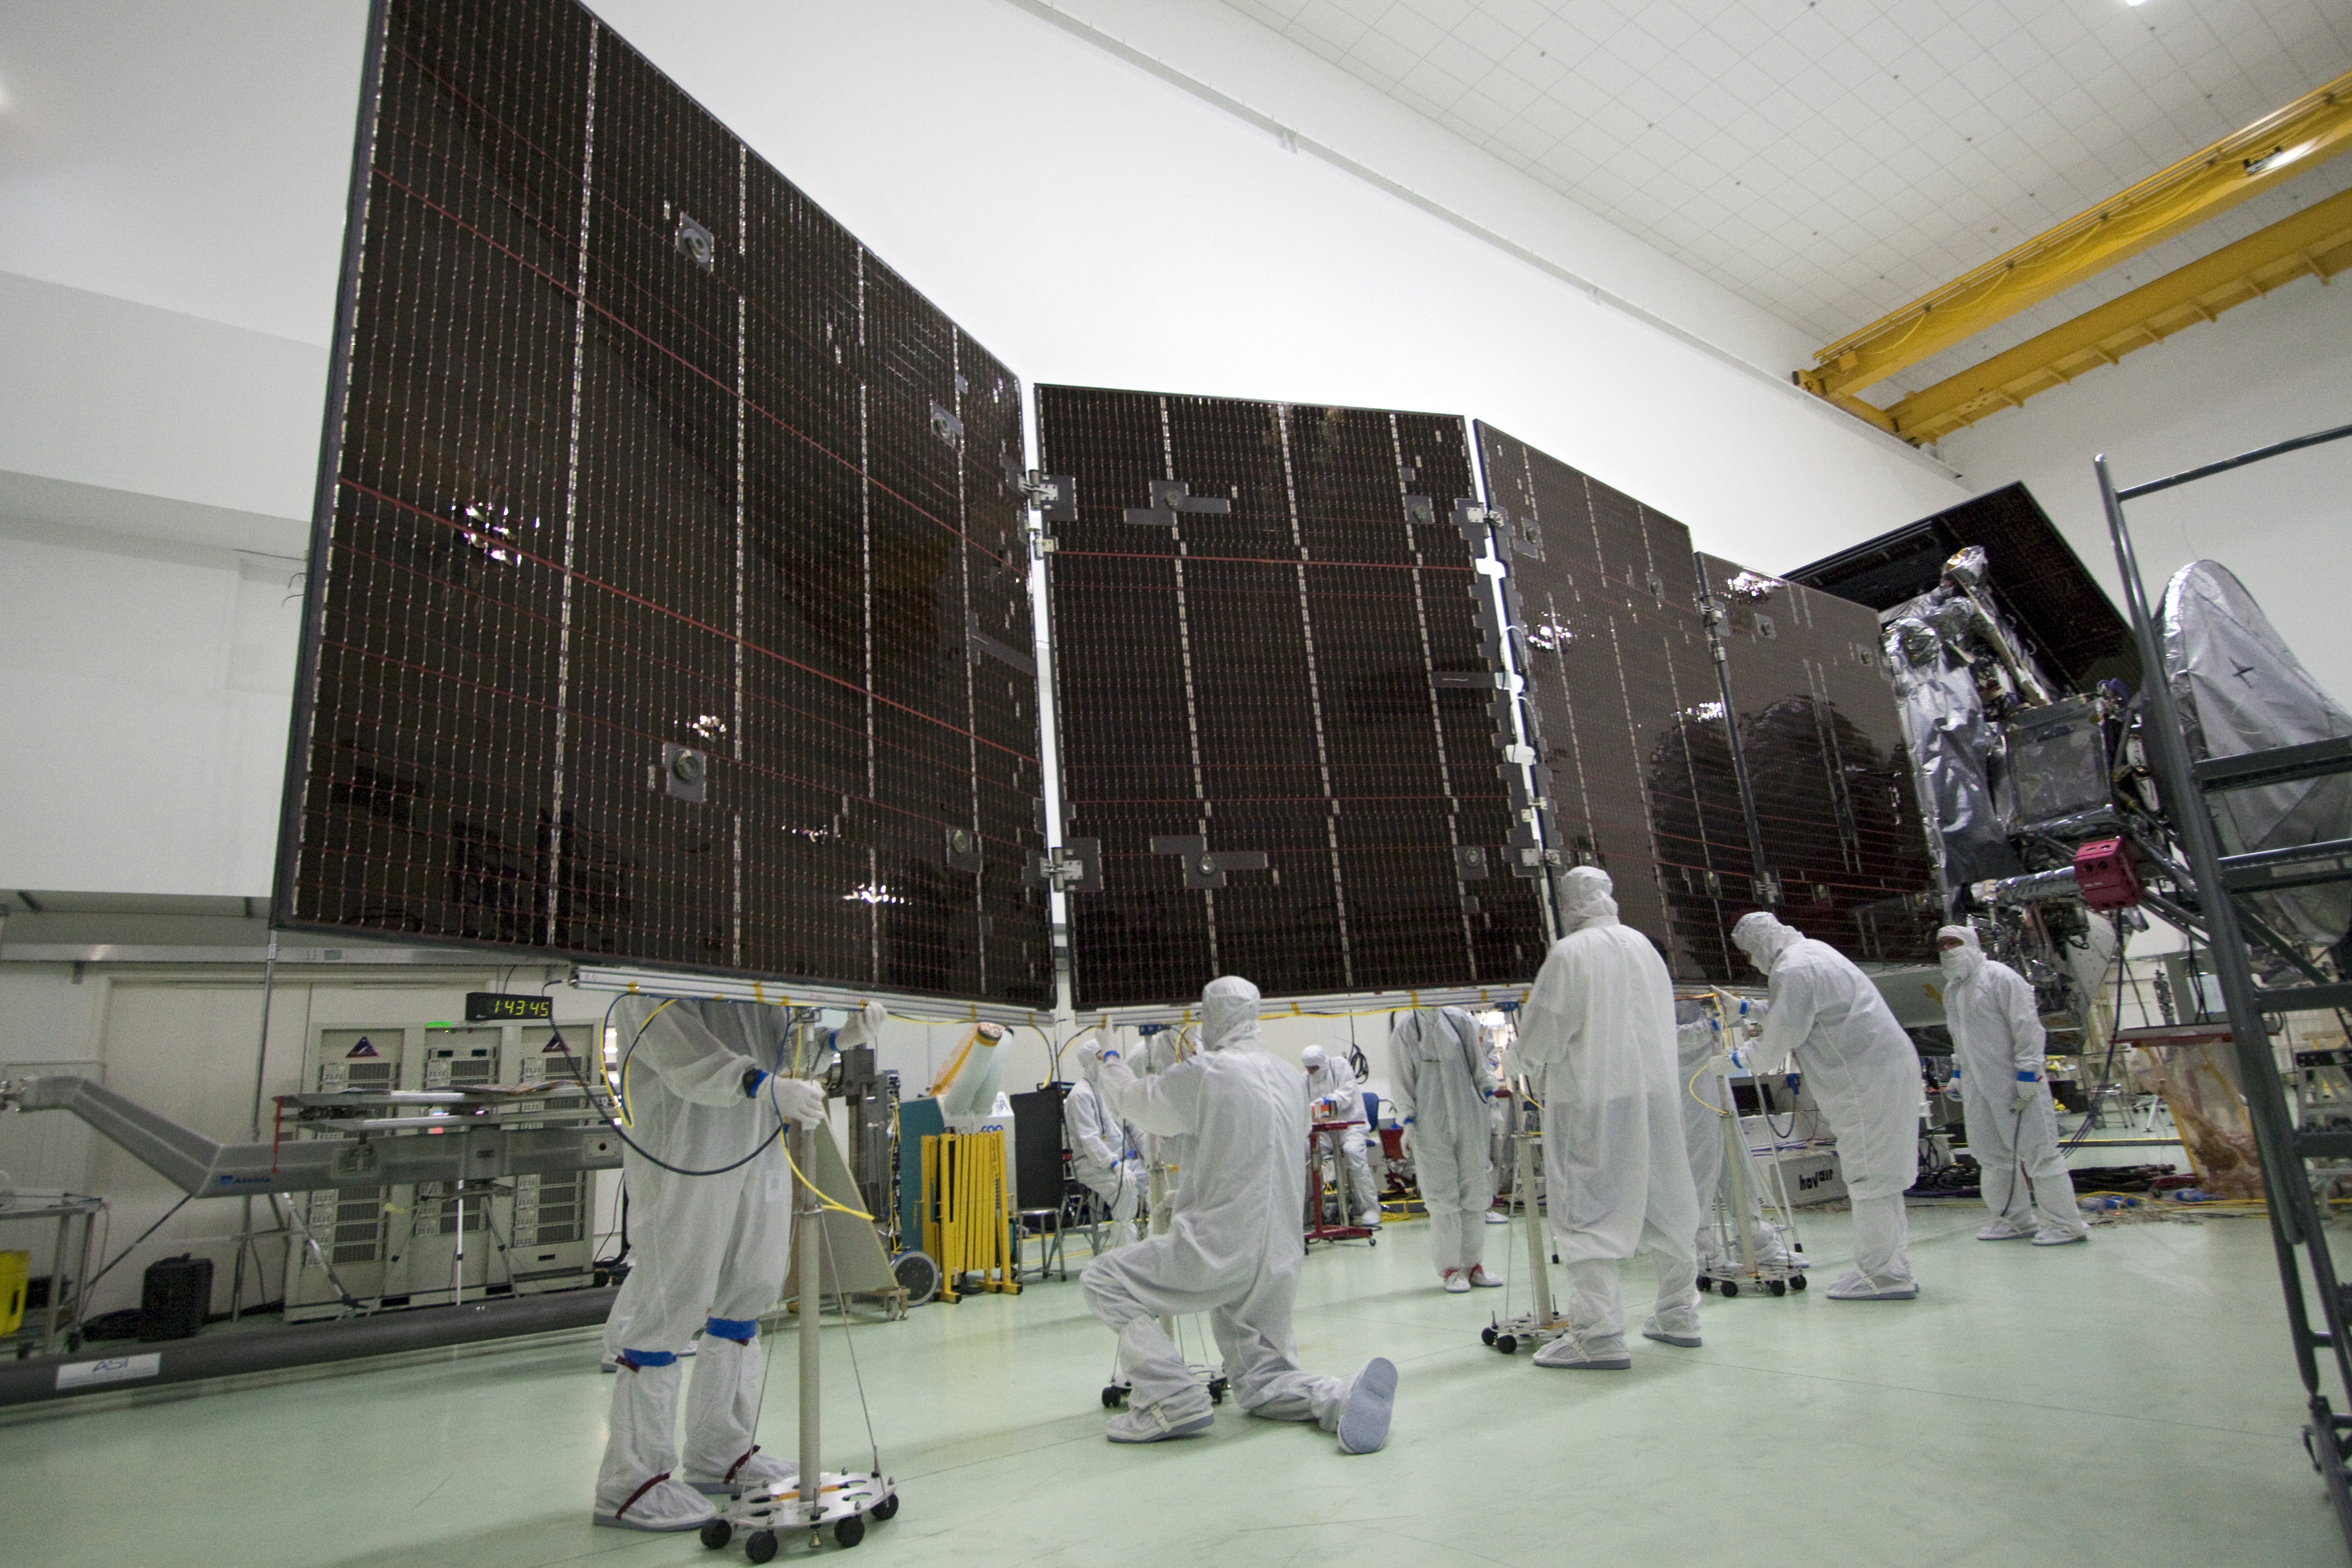 NASA's Juno spacecraft being prepped for launch